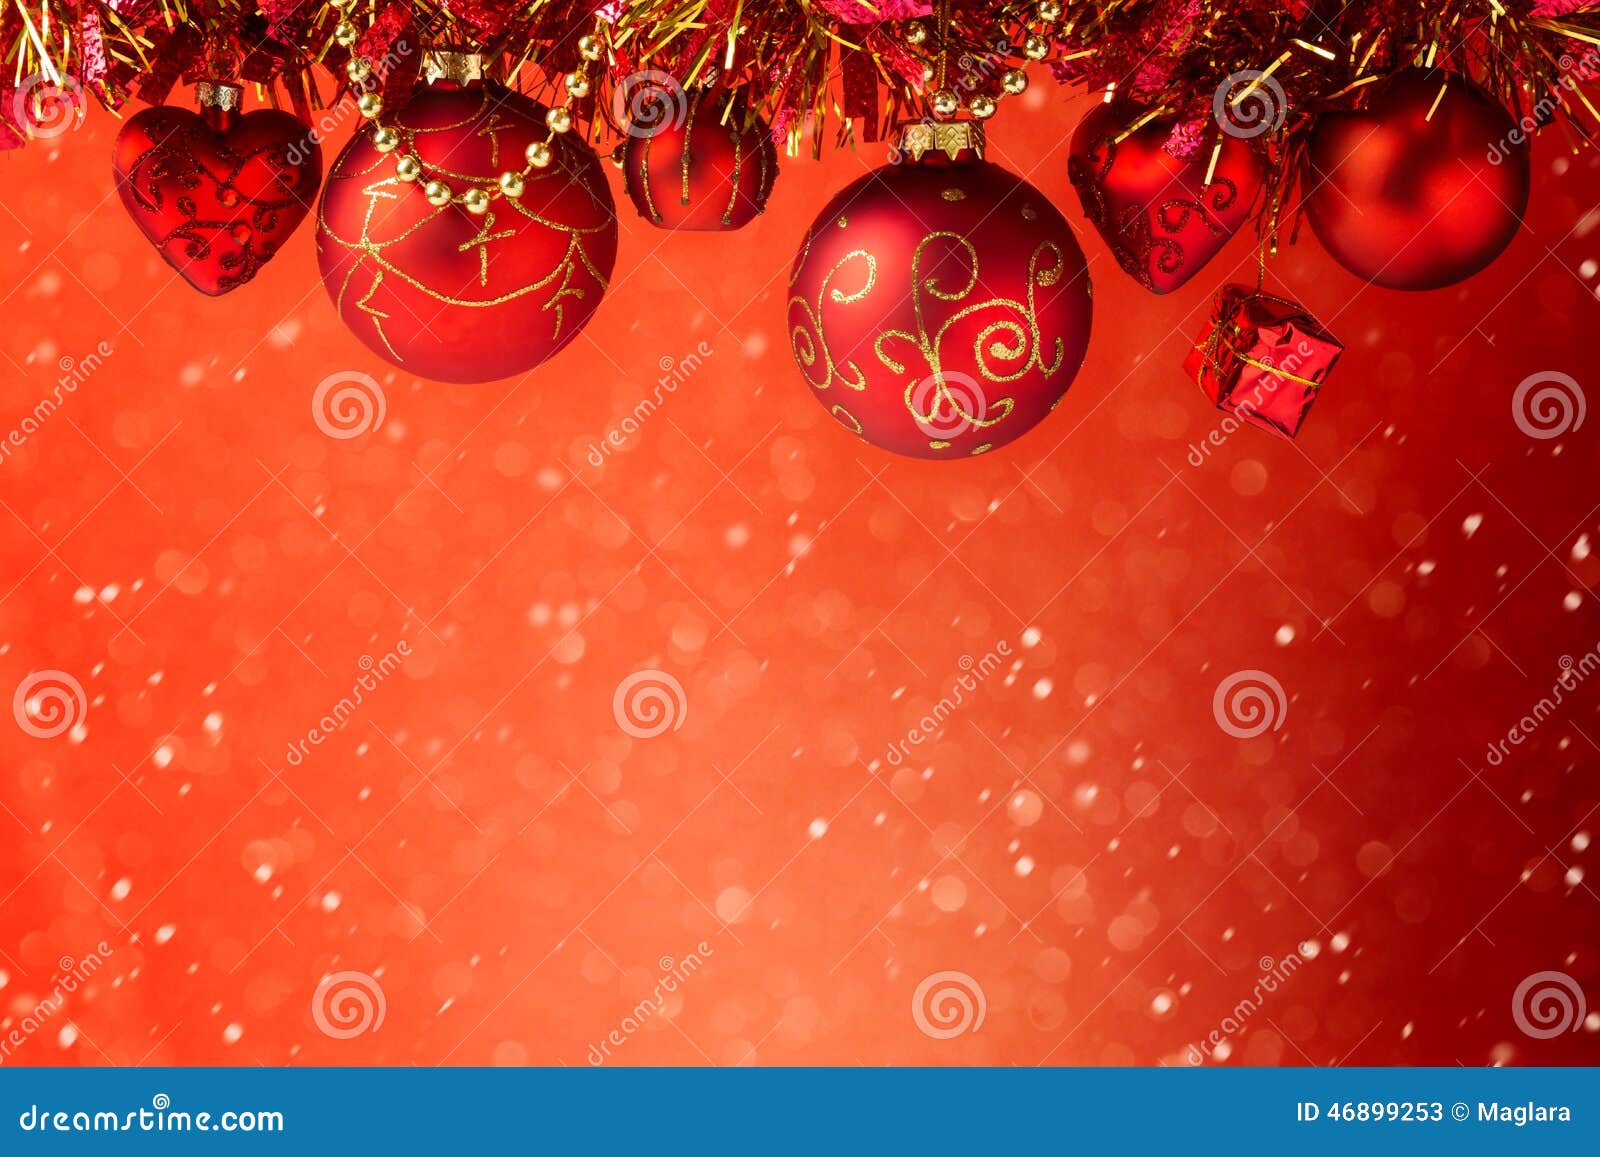 christmas holiday red dreamy background with decorations